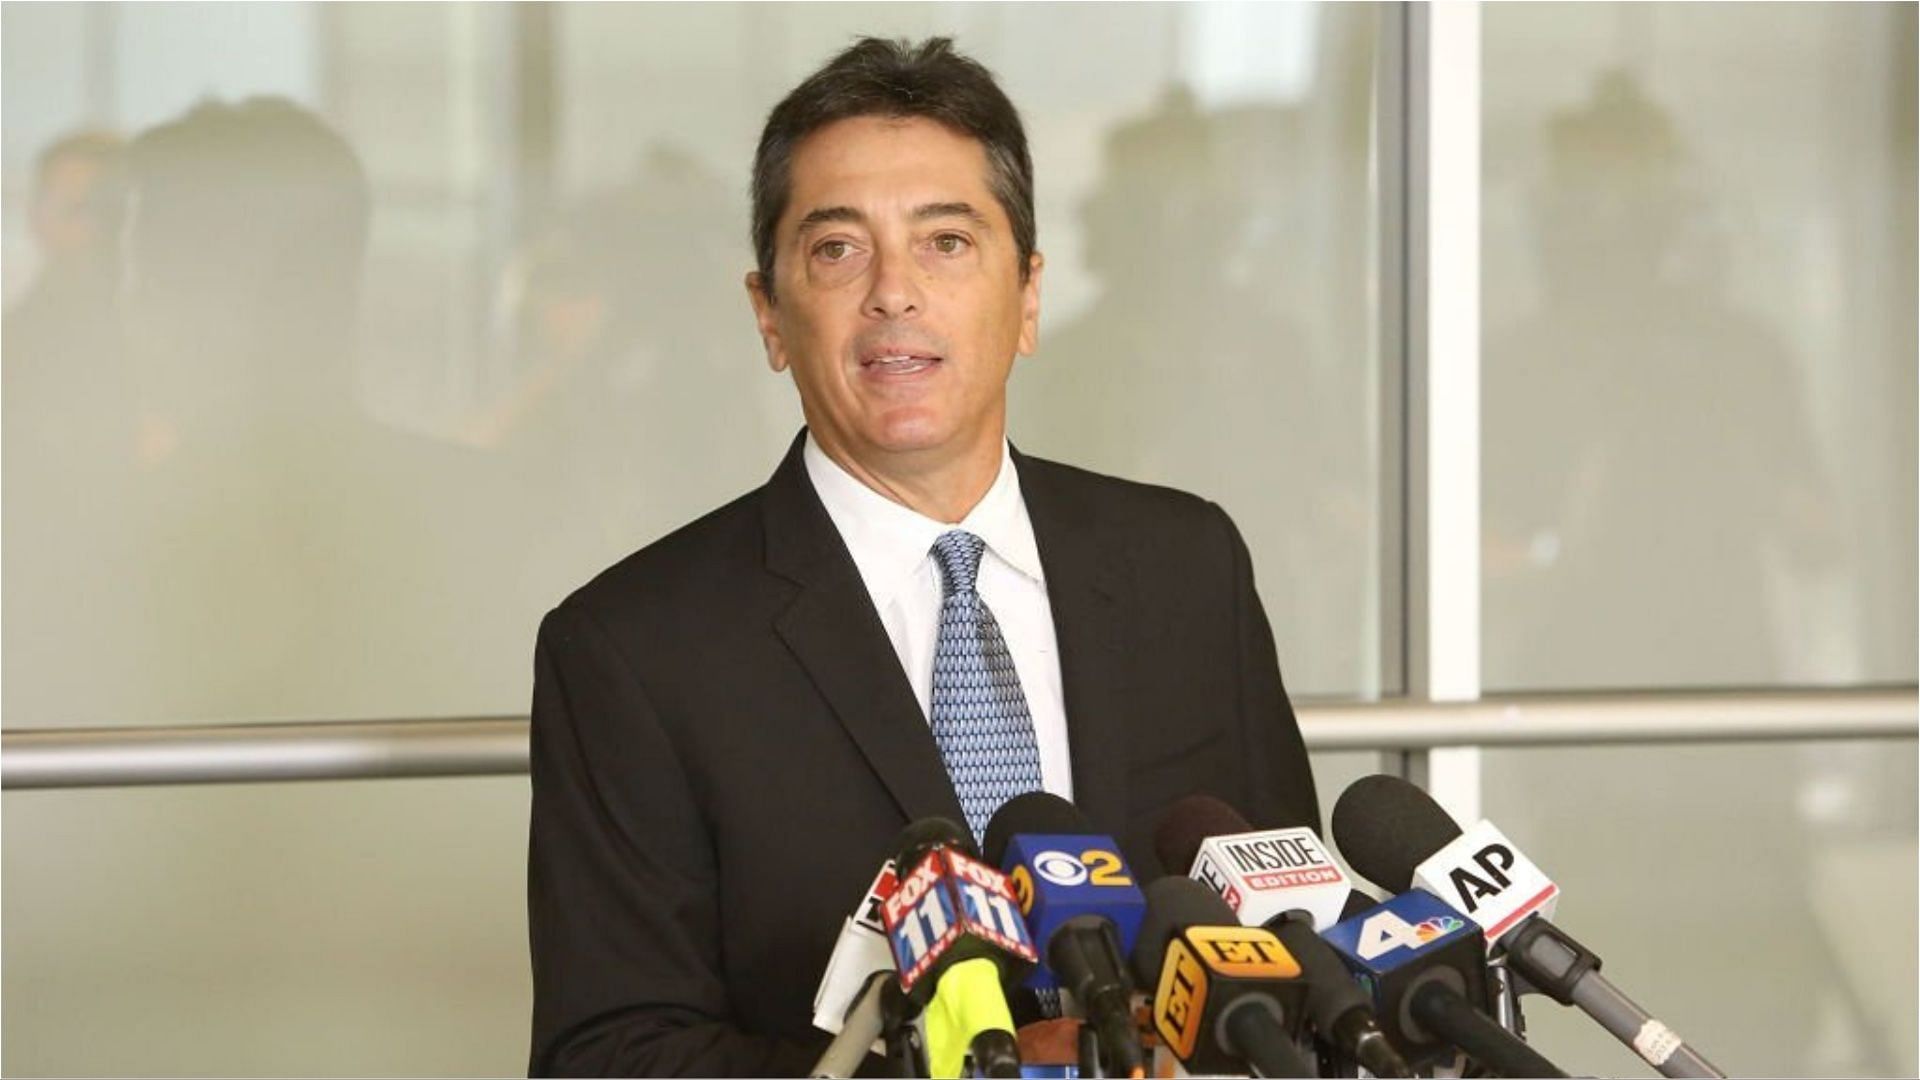 Scott Baio revealed his decision to leave California in a tweet (Image via Jesse Grant/Getty Images)